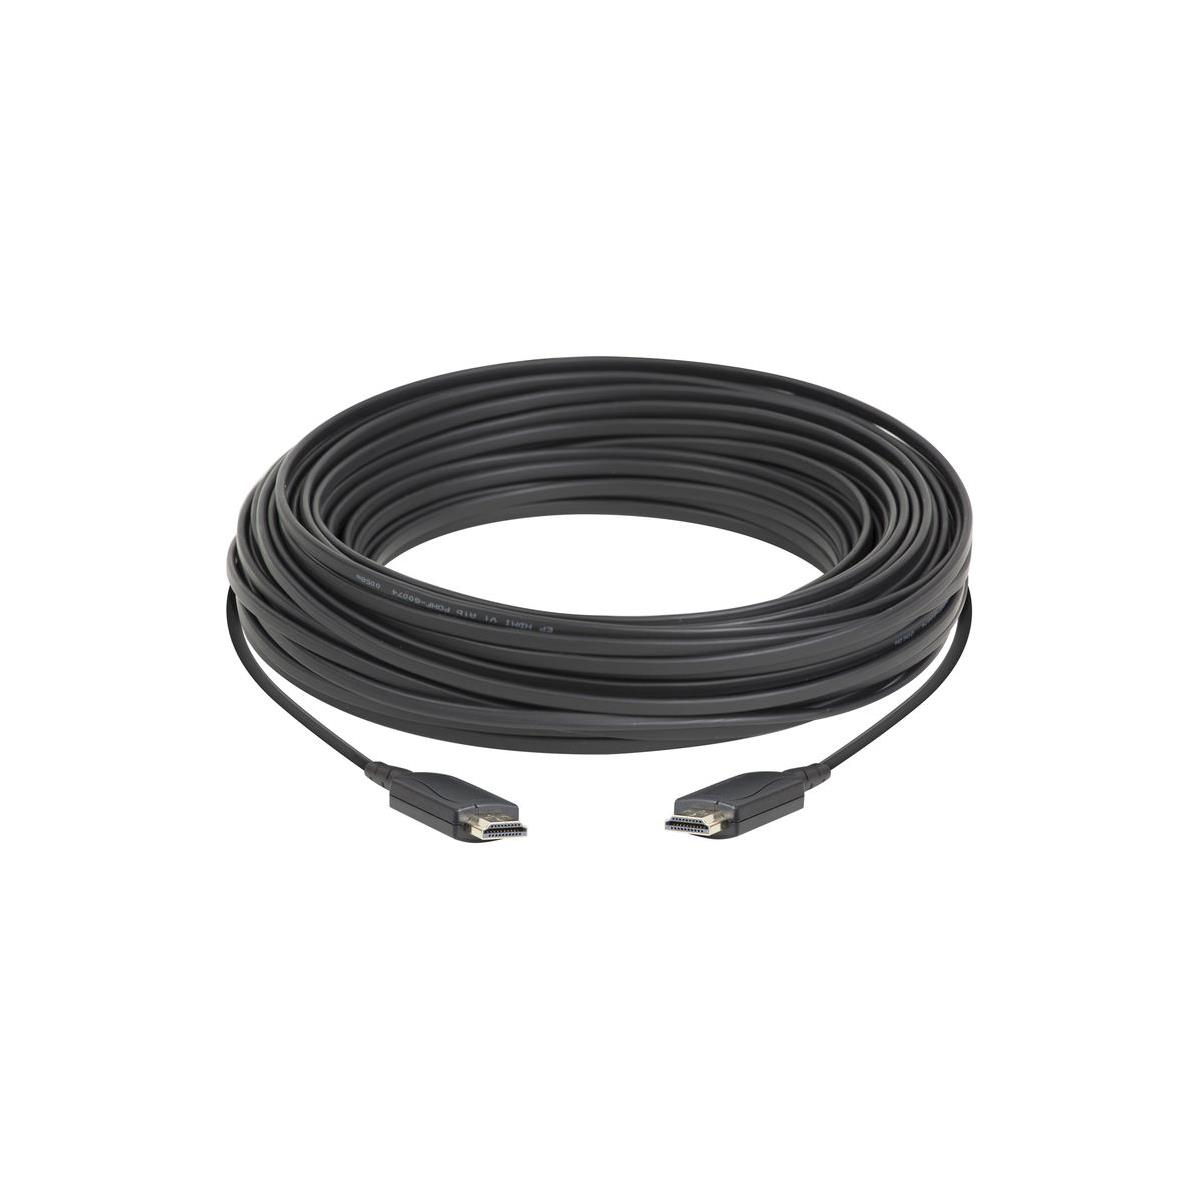 Image of Datavideo CB-60 98.4' HDMI Active Optical Cable